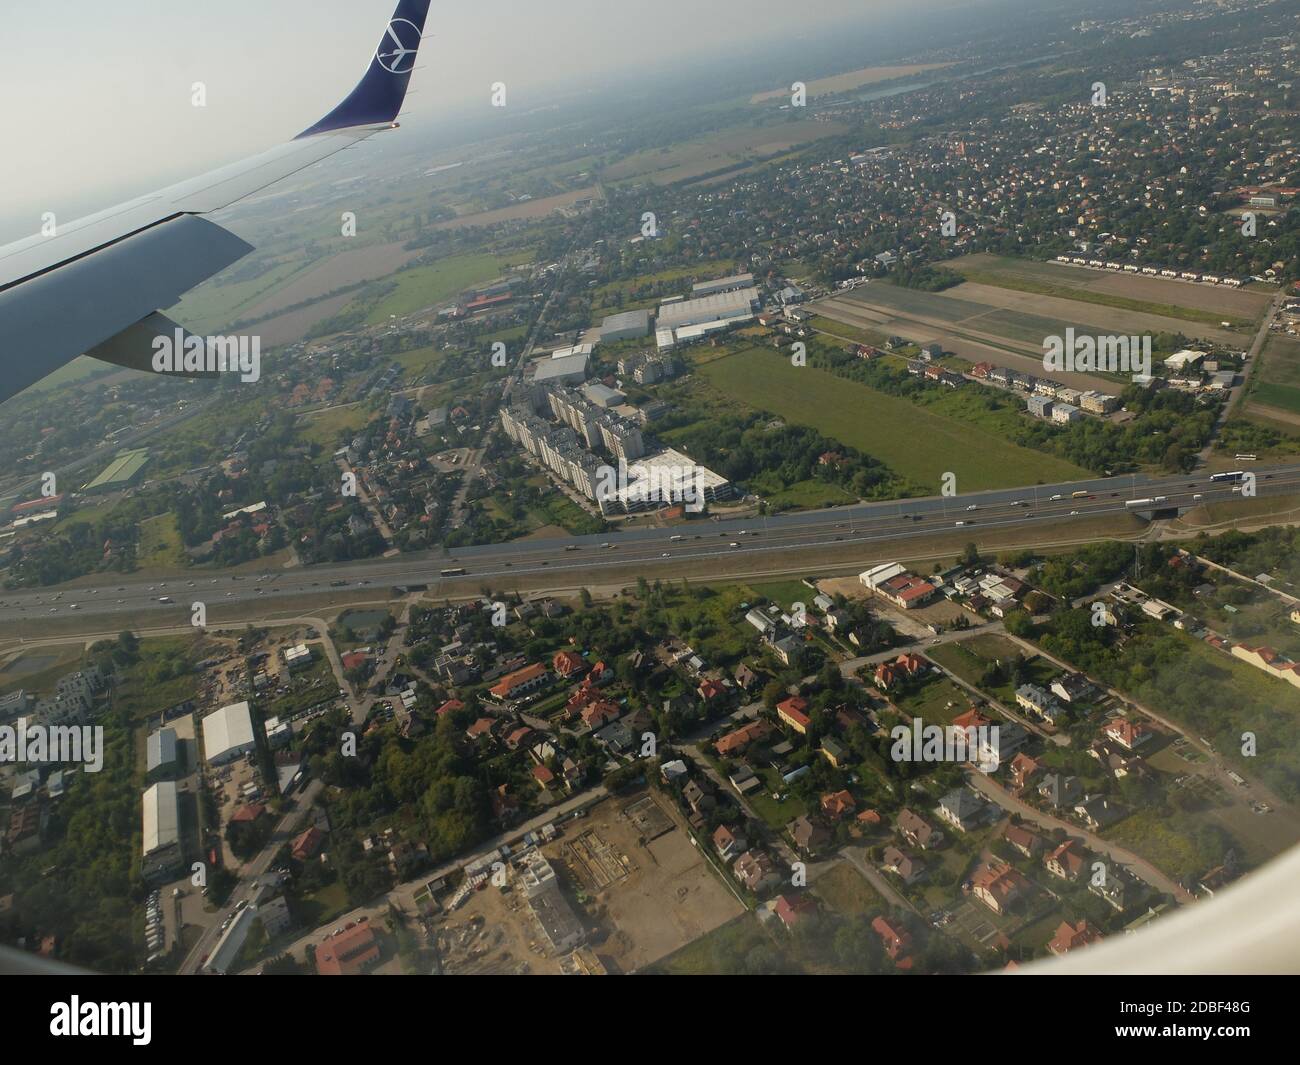 LOT Airlines B737-800 flight from London Heathrow to Warsaw,Poland approaches Chopin Airport,Warsaw as viewed from right hand passenger cabin window o Stock Photo